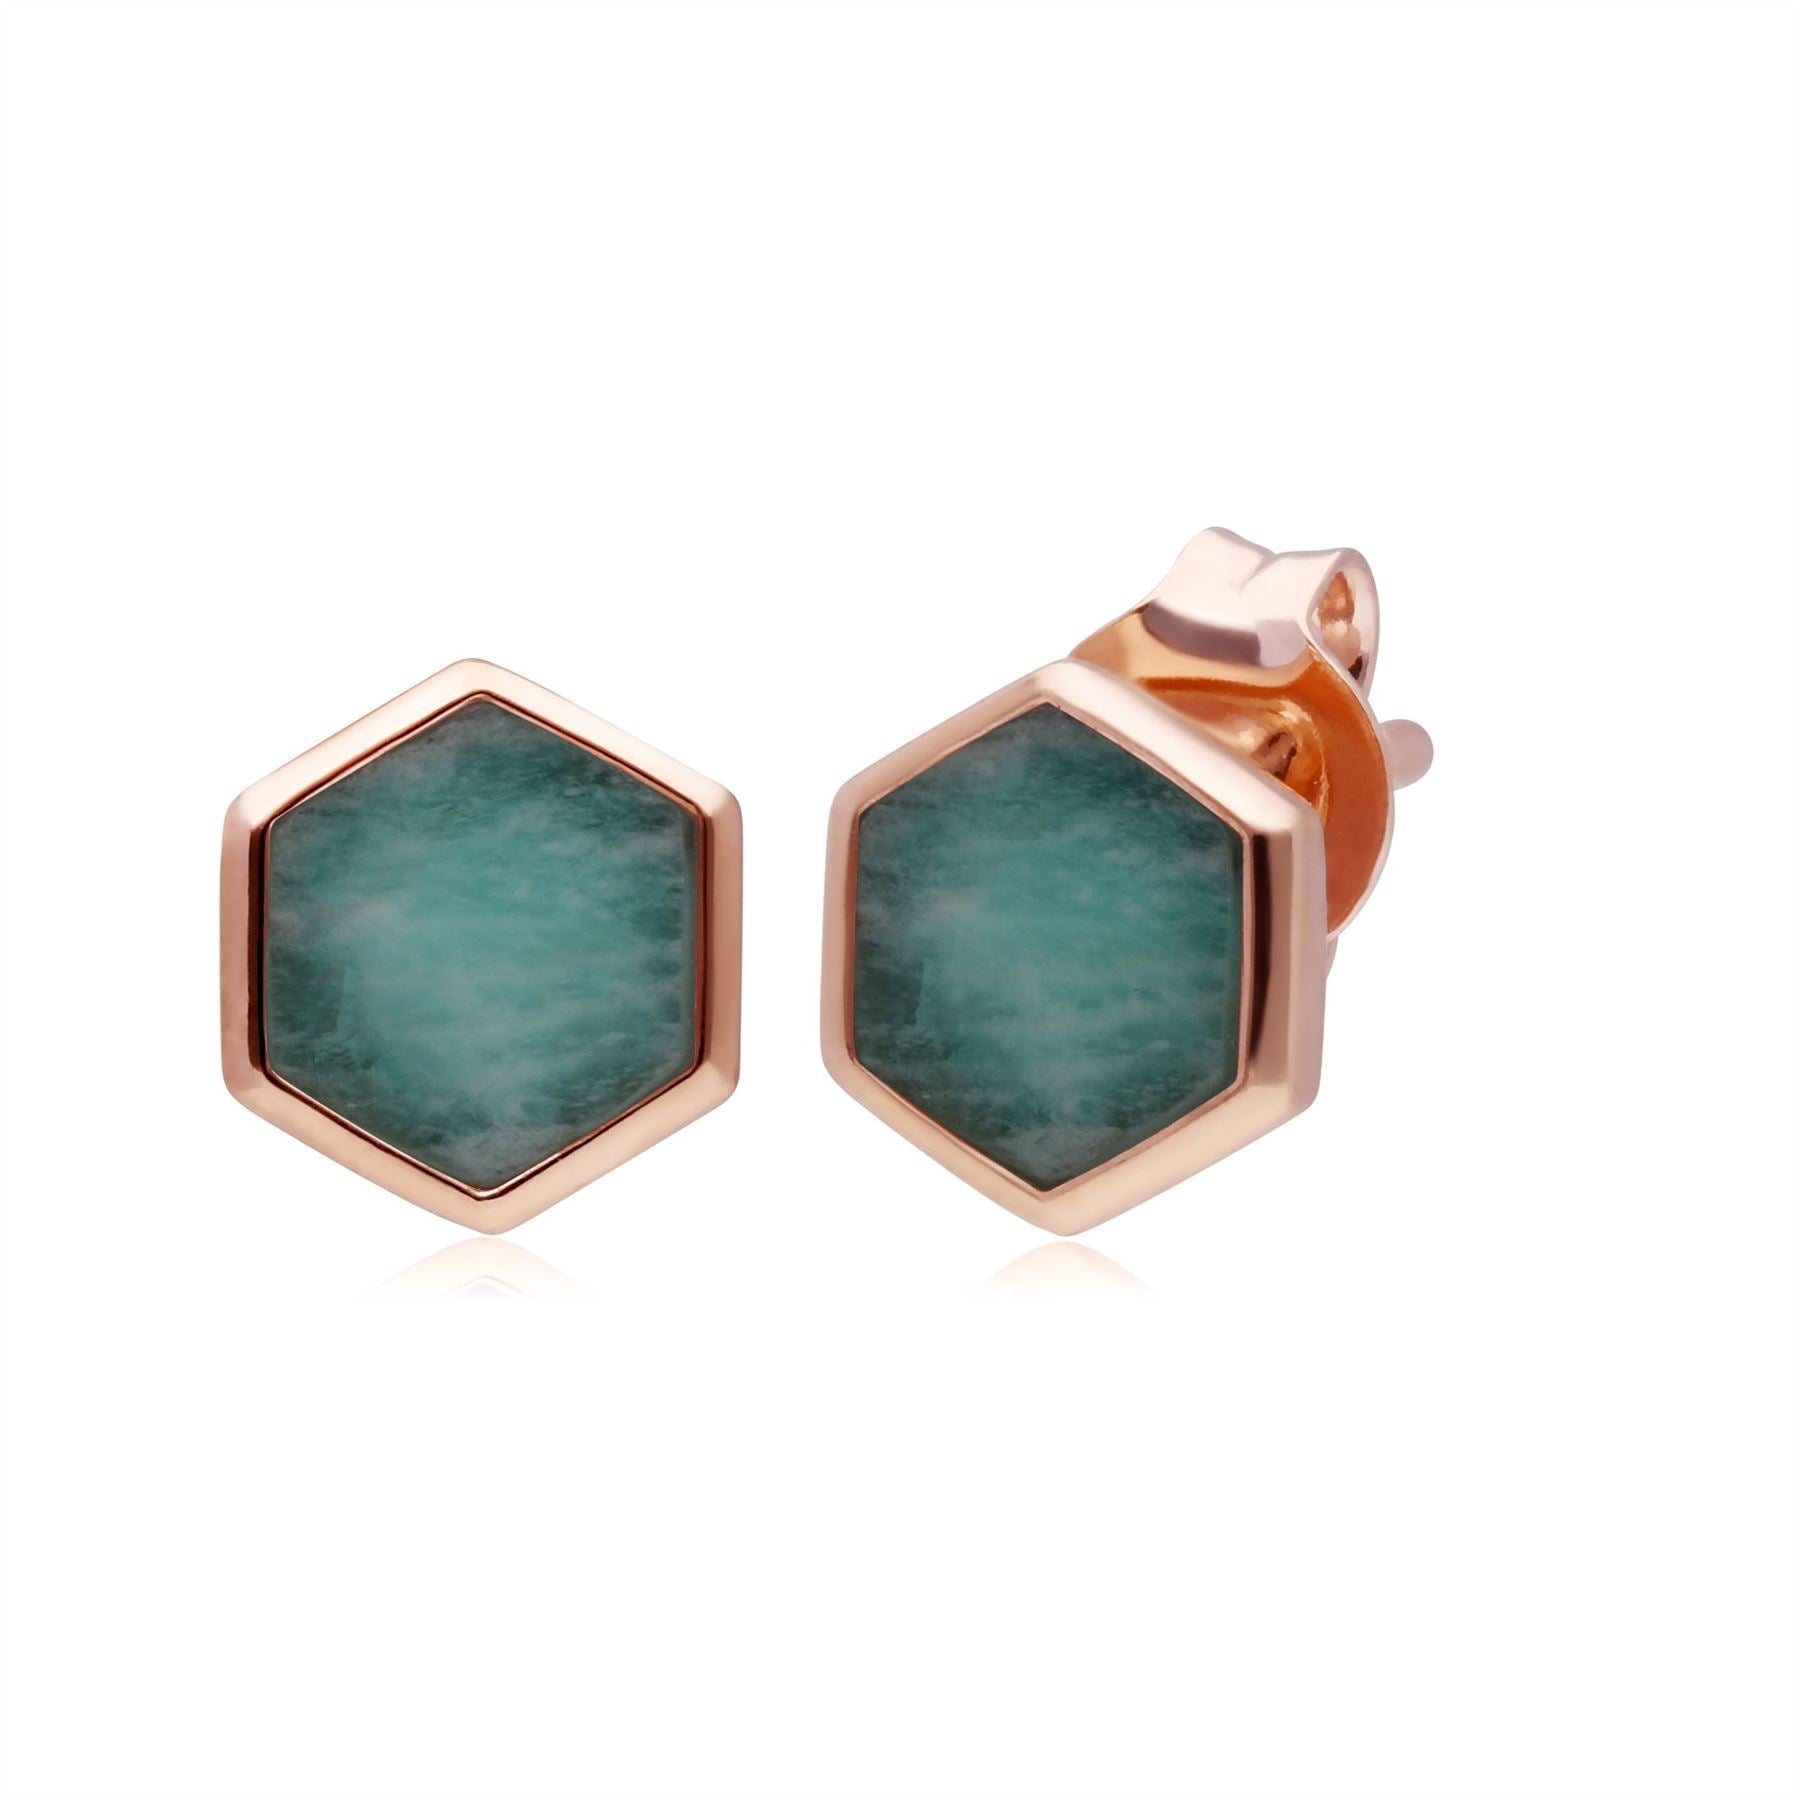 Micro Statement Amazonite Stud Earrings in Rose Gold Plated 925 Sterling Silver